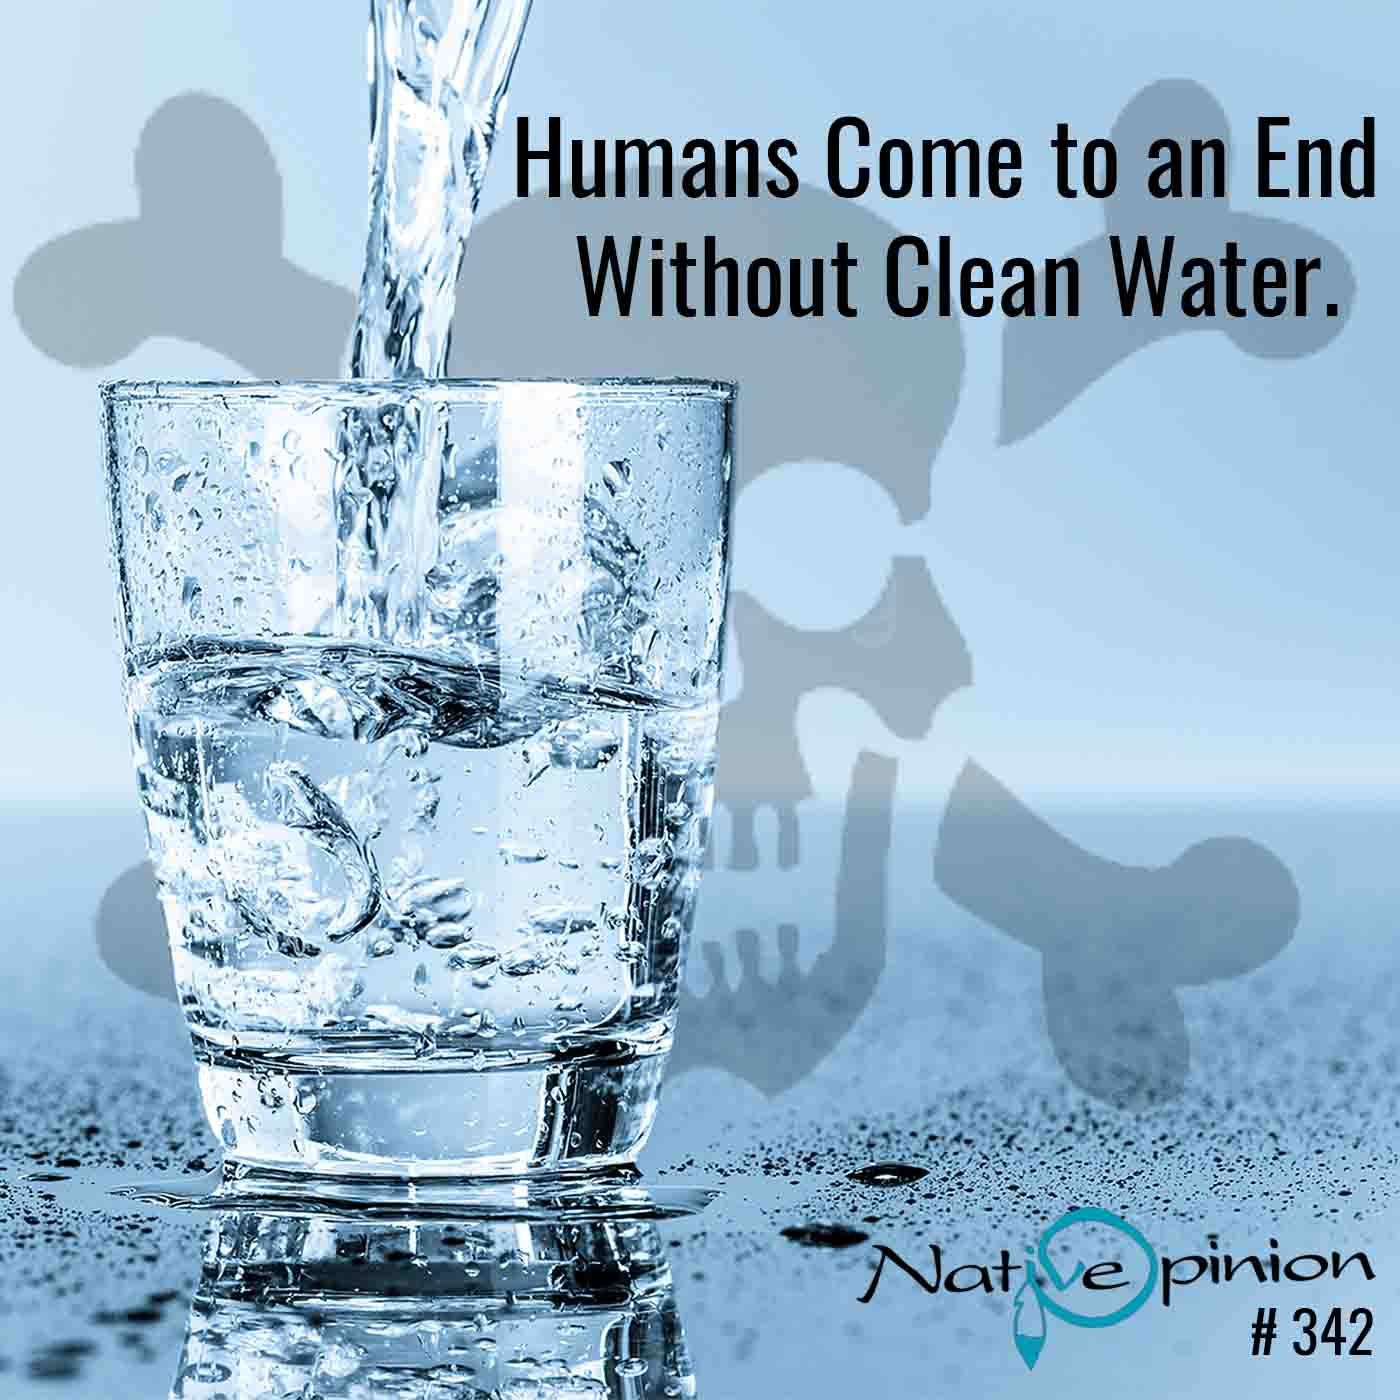 Episode 342 “Humans Come to an End Without clean Water.”